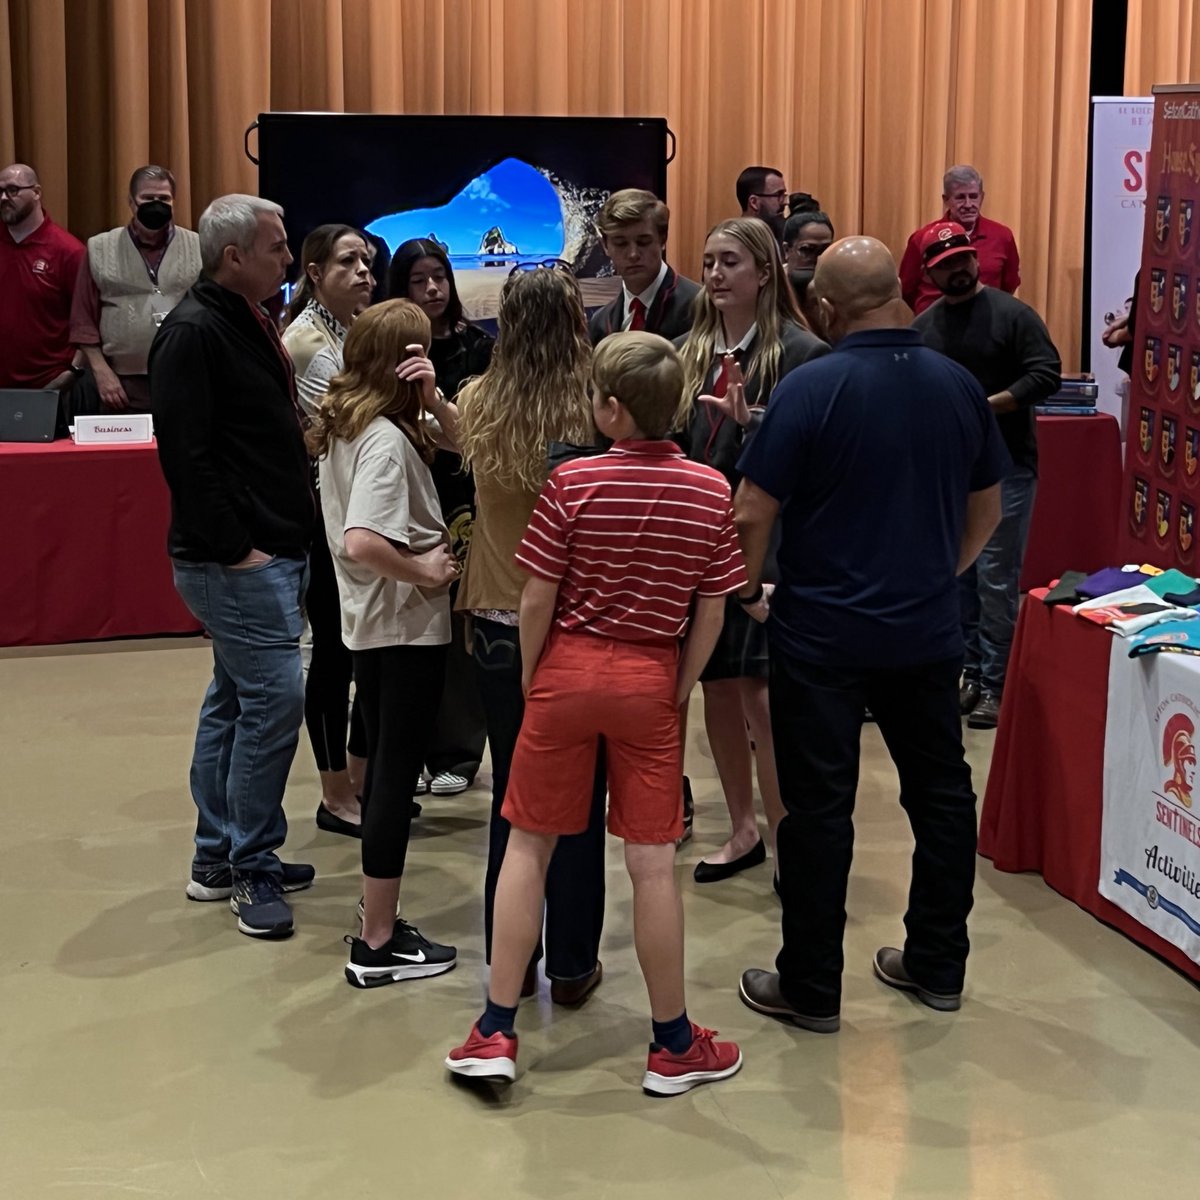 Today, we hosted families from around the valley for our Open House! It was great to inform them about what Seton Catholic is all about and it was exciting to see all the potential future Sentinels! #SentinelFamily